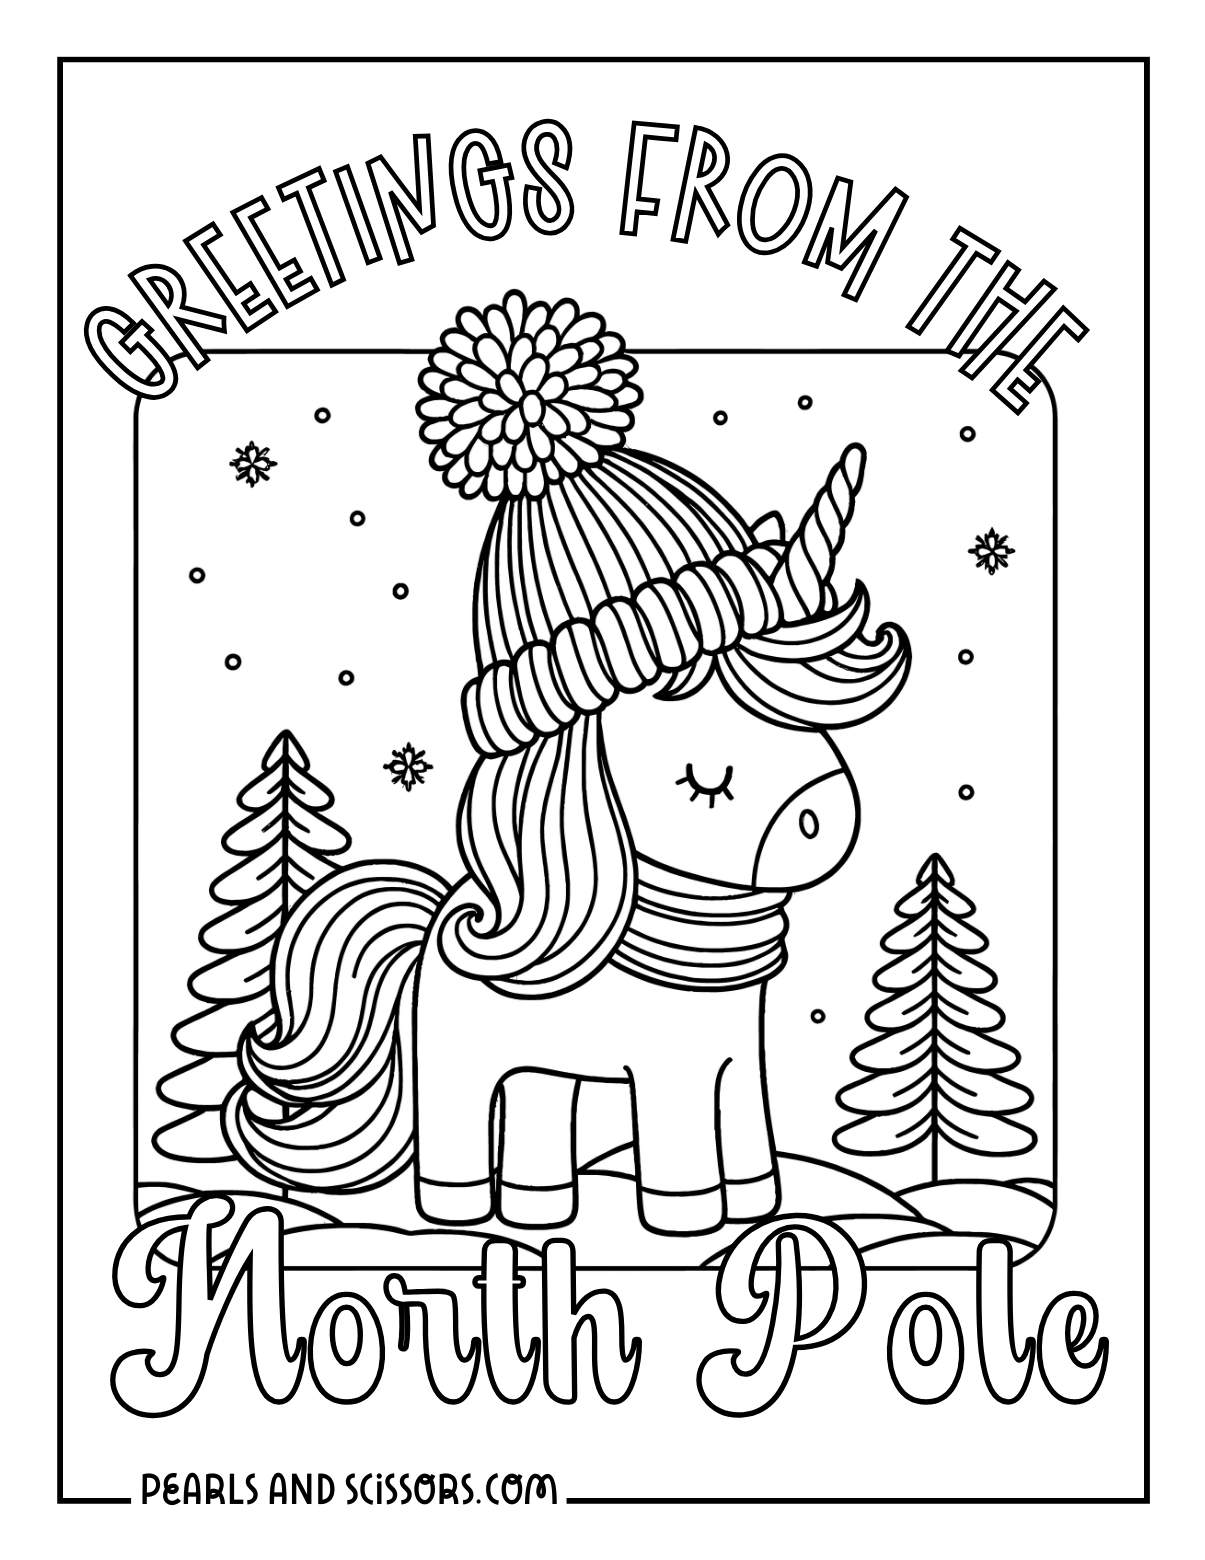 North pole unicorn wearing a winter hat on its head coloring page.